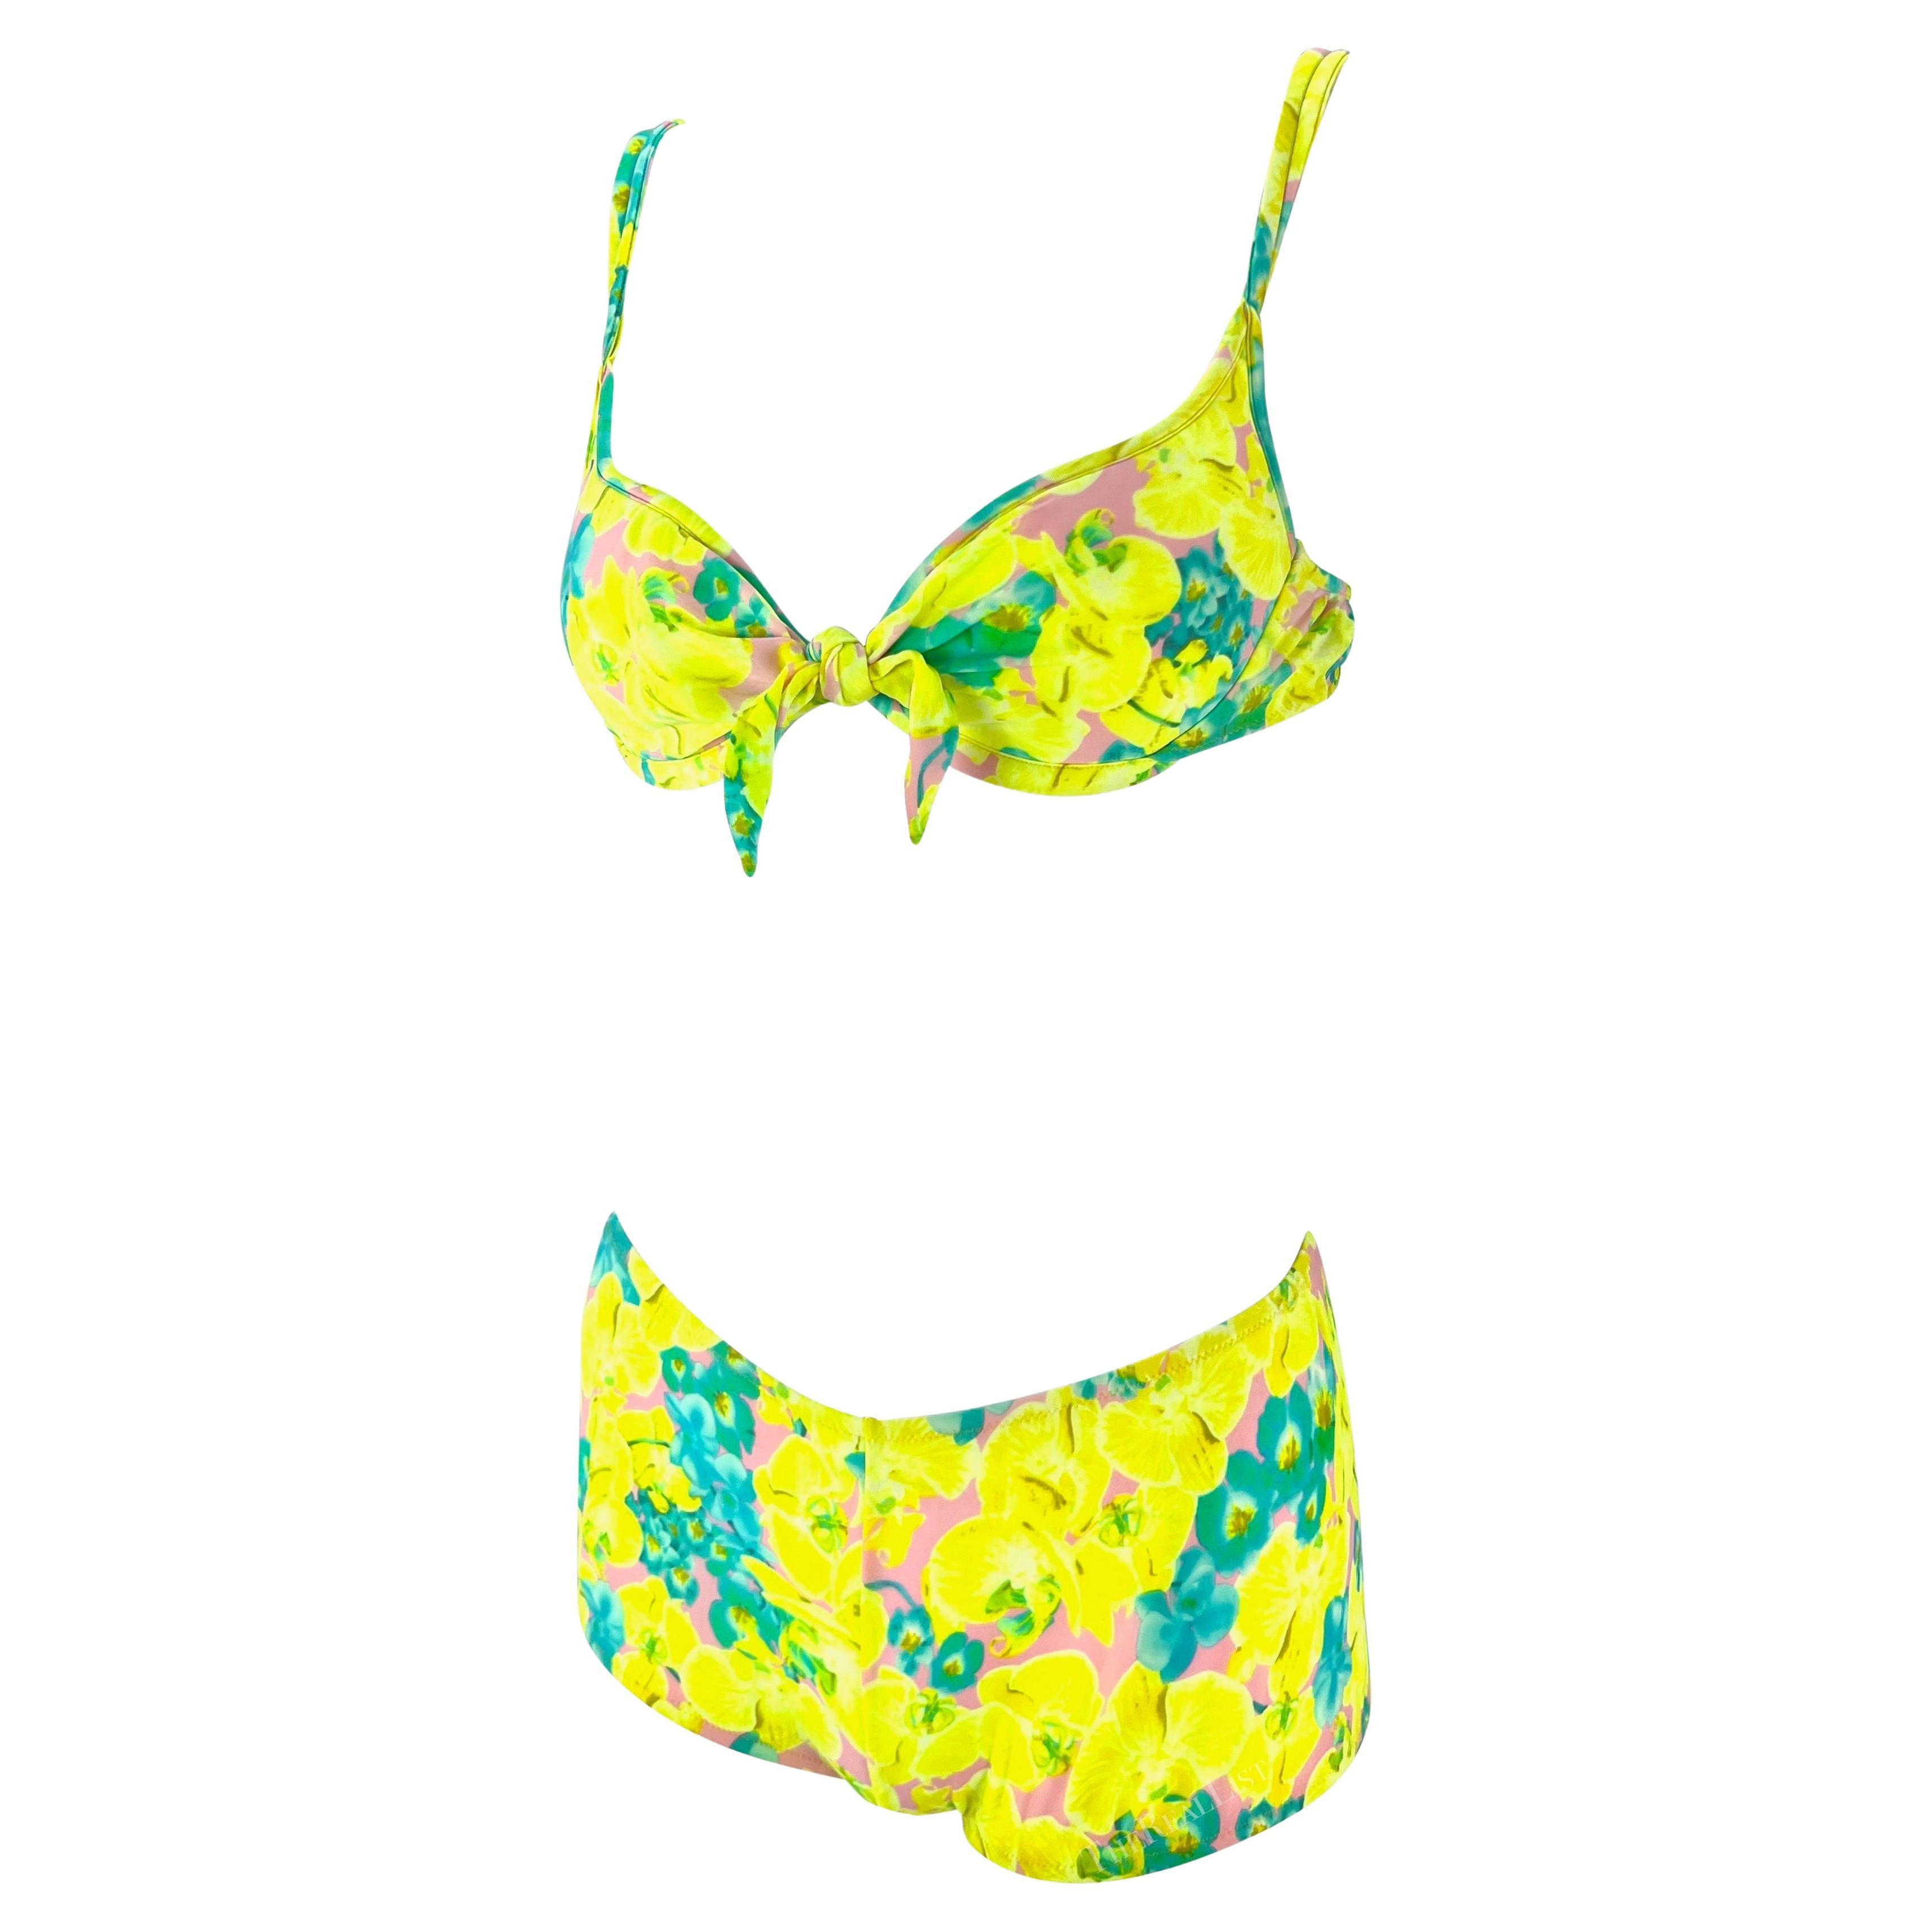 Presenting a vibrant yellow floral Versace bikini set, designed by Donatella Versace. From the Spring/Summer 2004 collection, this bikini set is comprised of a plunge-style top and boyshorts both covered in a bright orchid print. The top is made